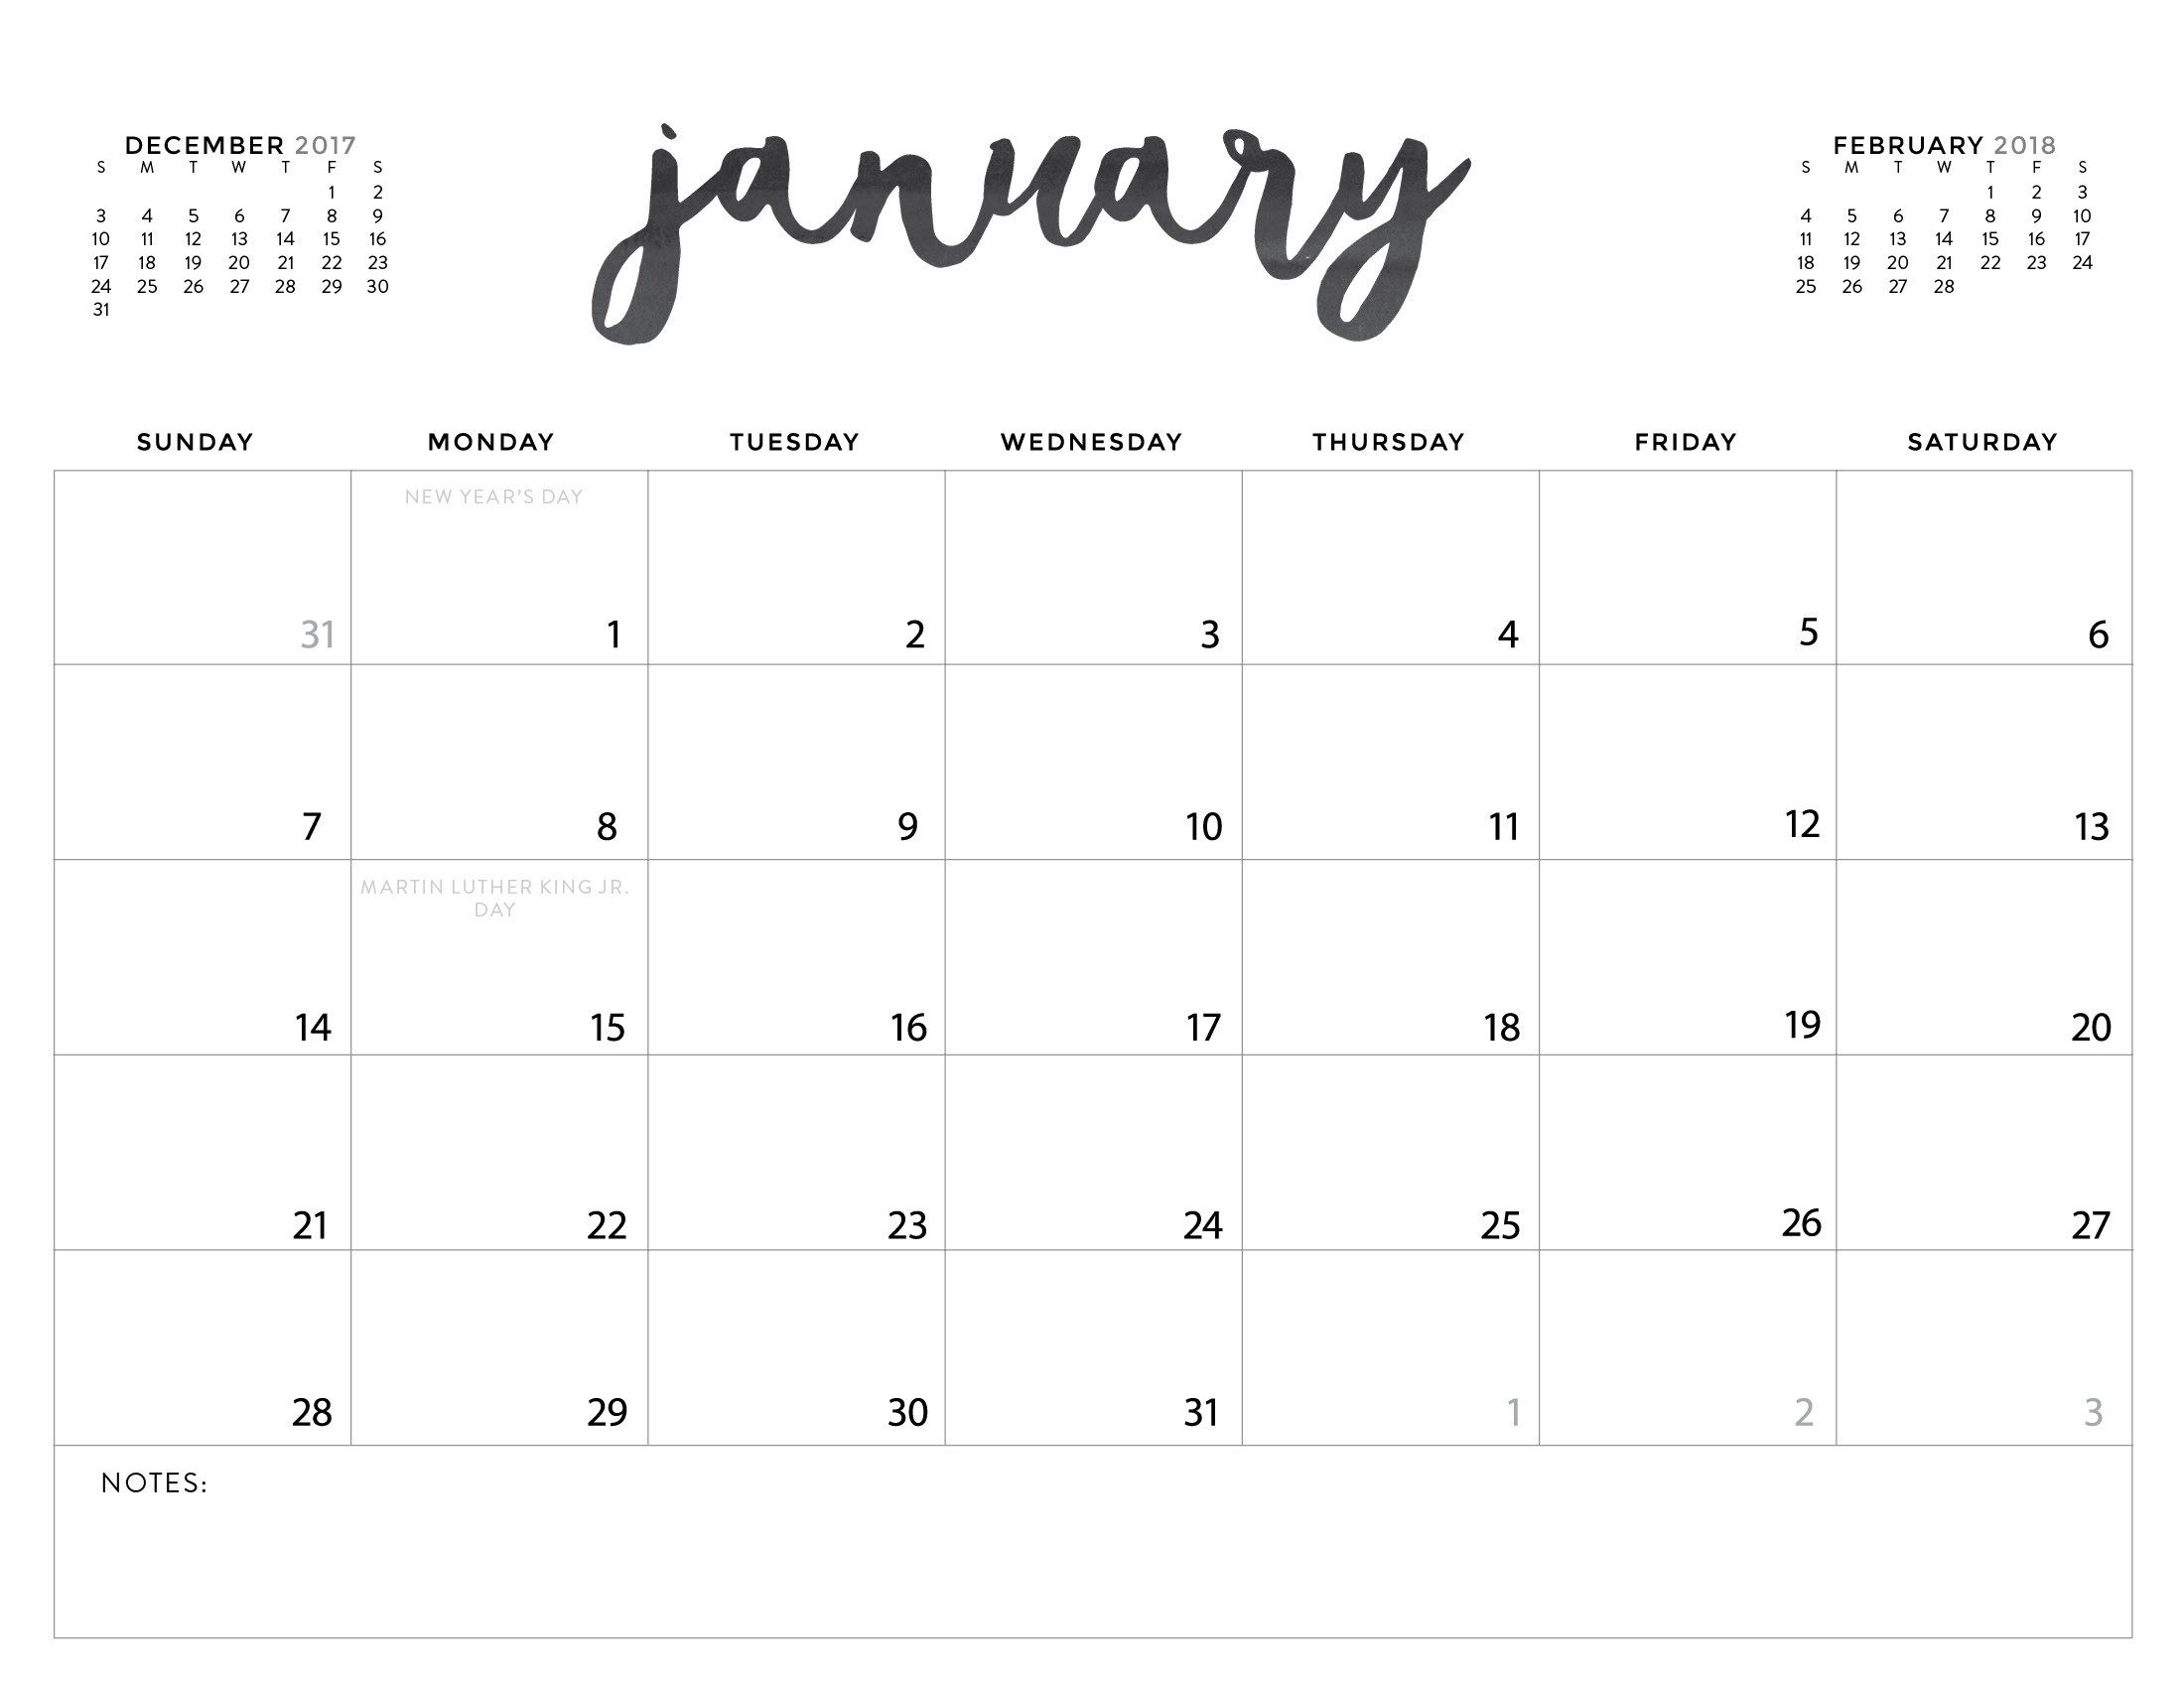 Download Your Free 2018 Printable Calendars Today! There Are 28 intended for 2020 Printable Calender Imom